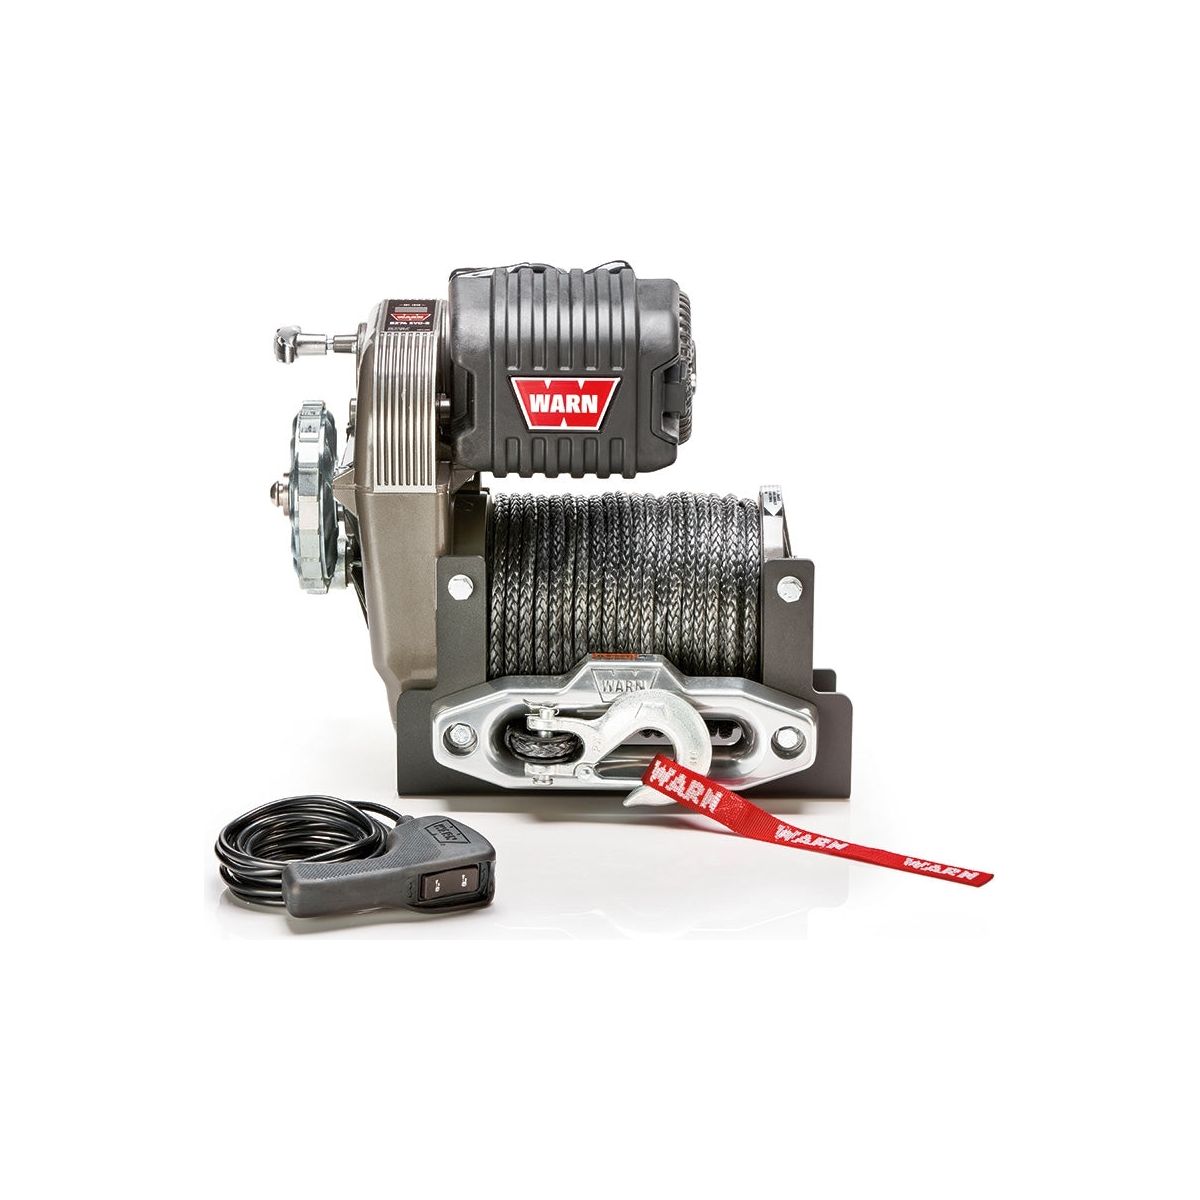 WARN 106175 - M8274 Winch 10000 lbs. Synthetic Rope